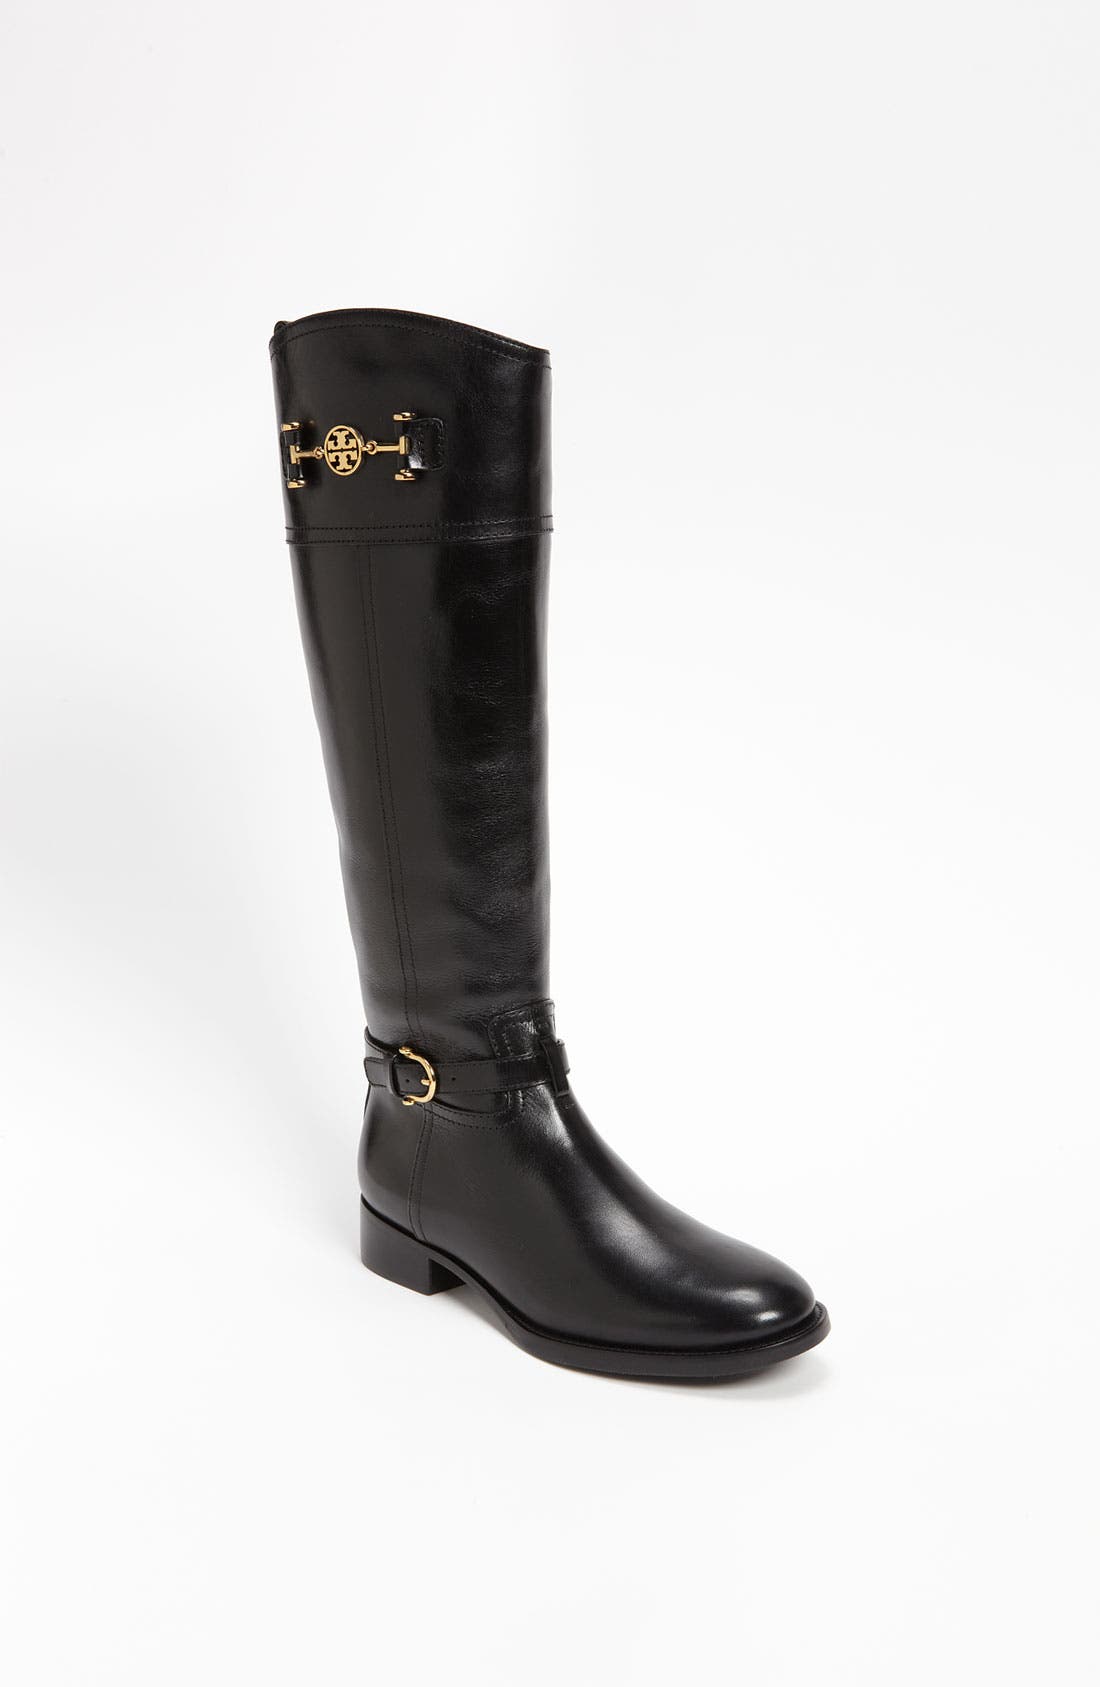 tory burch riding boots nordstrom rack